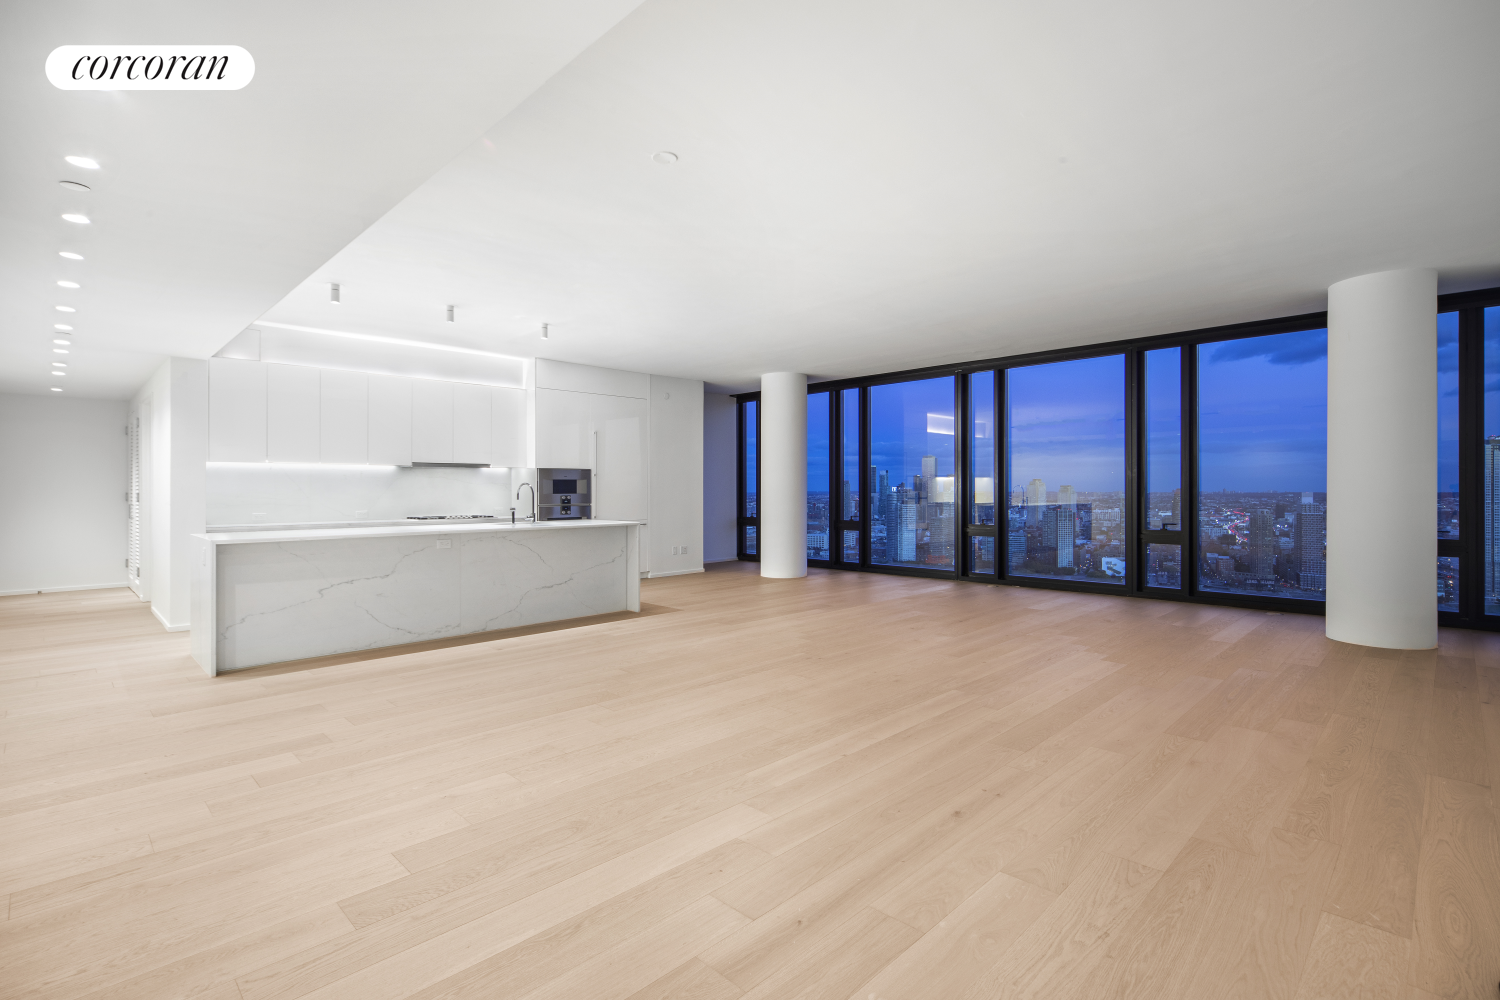 695 1st Avenue 40A, Murray Hill, Midtown East, NYC - 4 Bedrooms  
4.5 Bathrooms  
6 Rooms - 